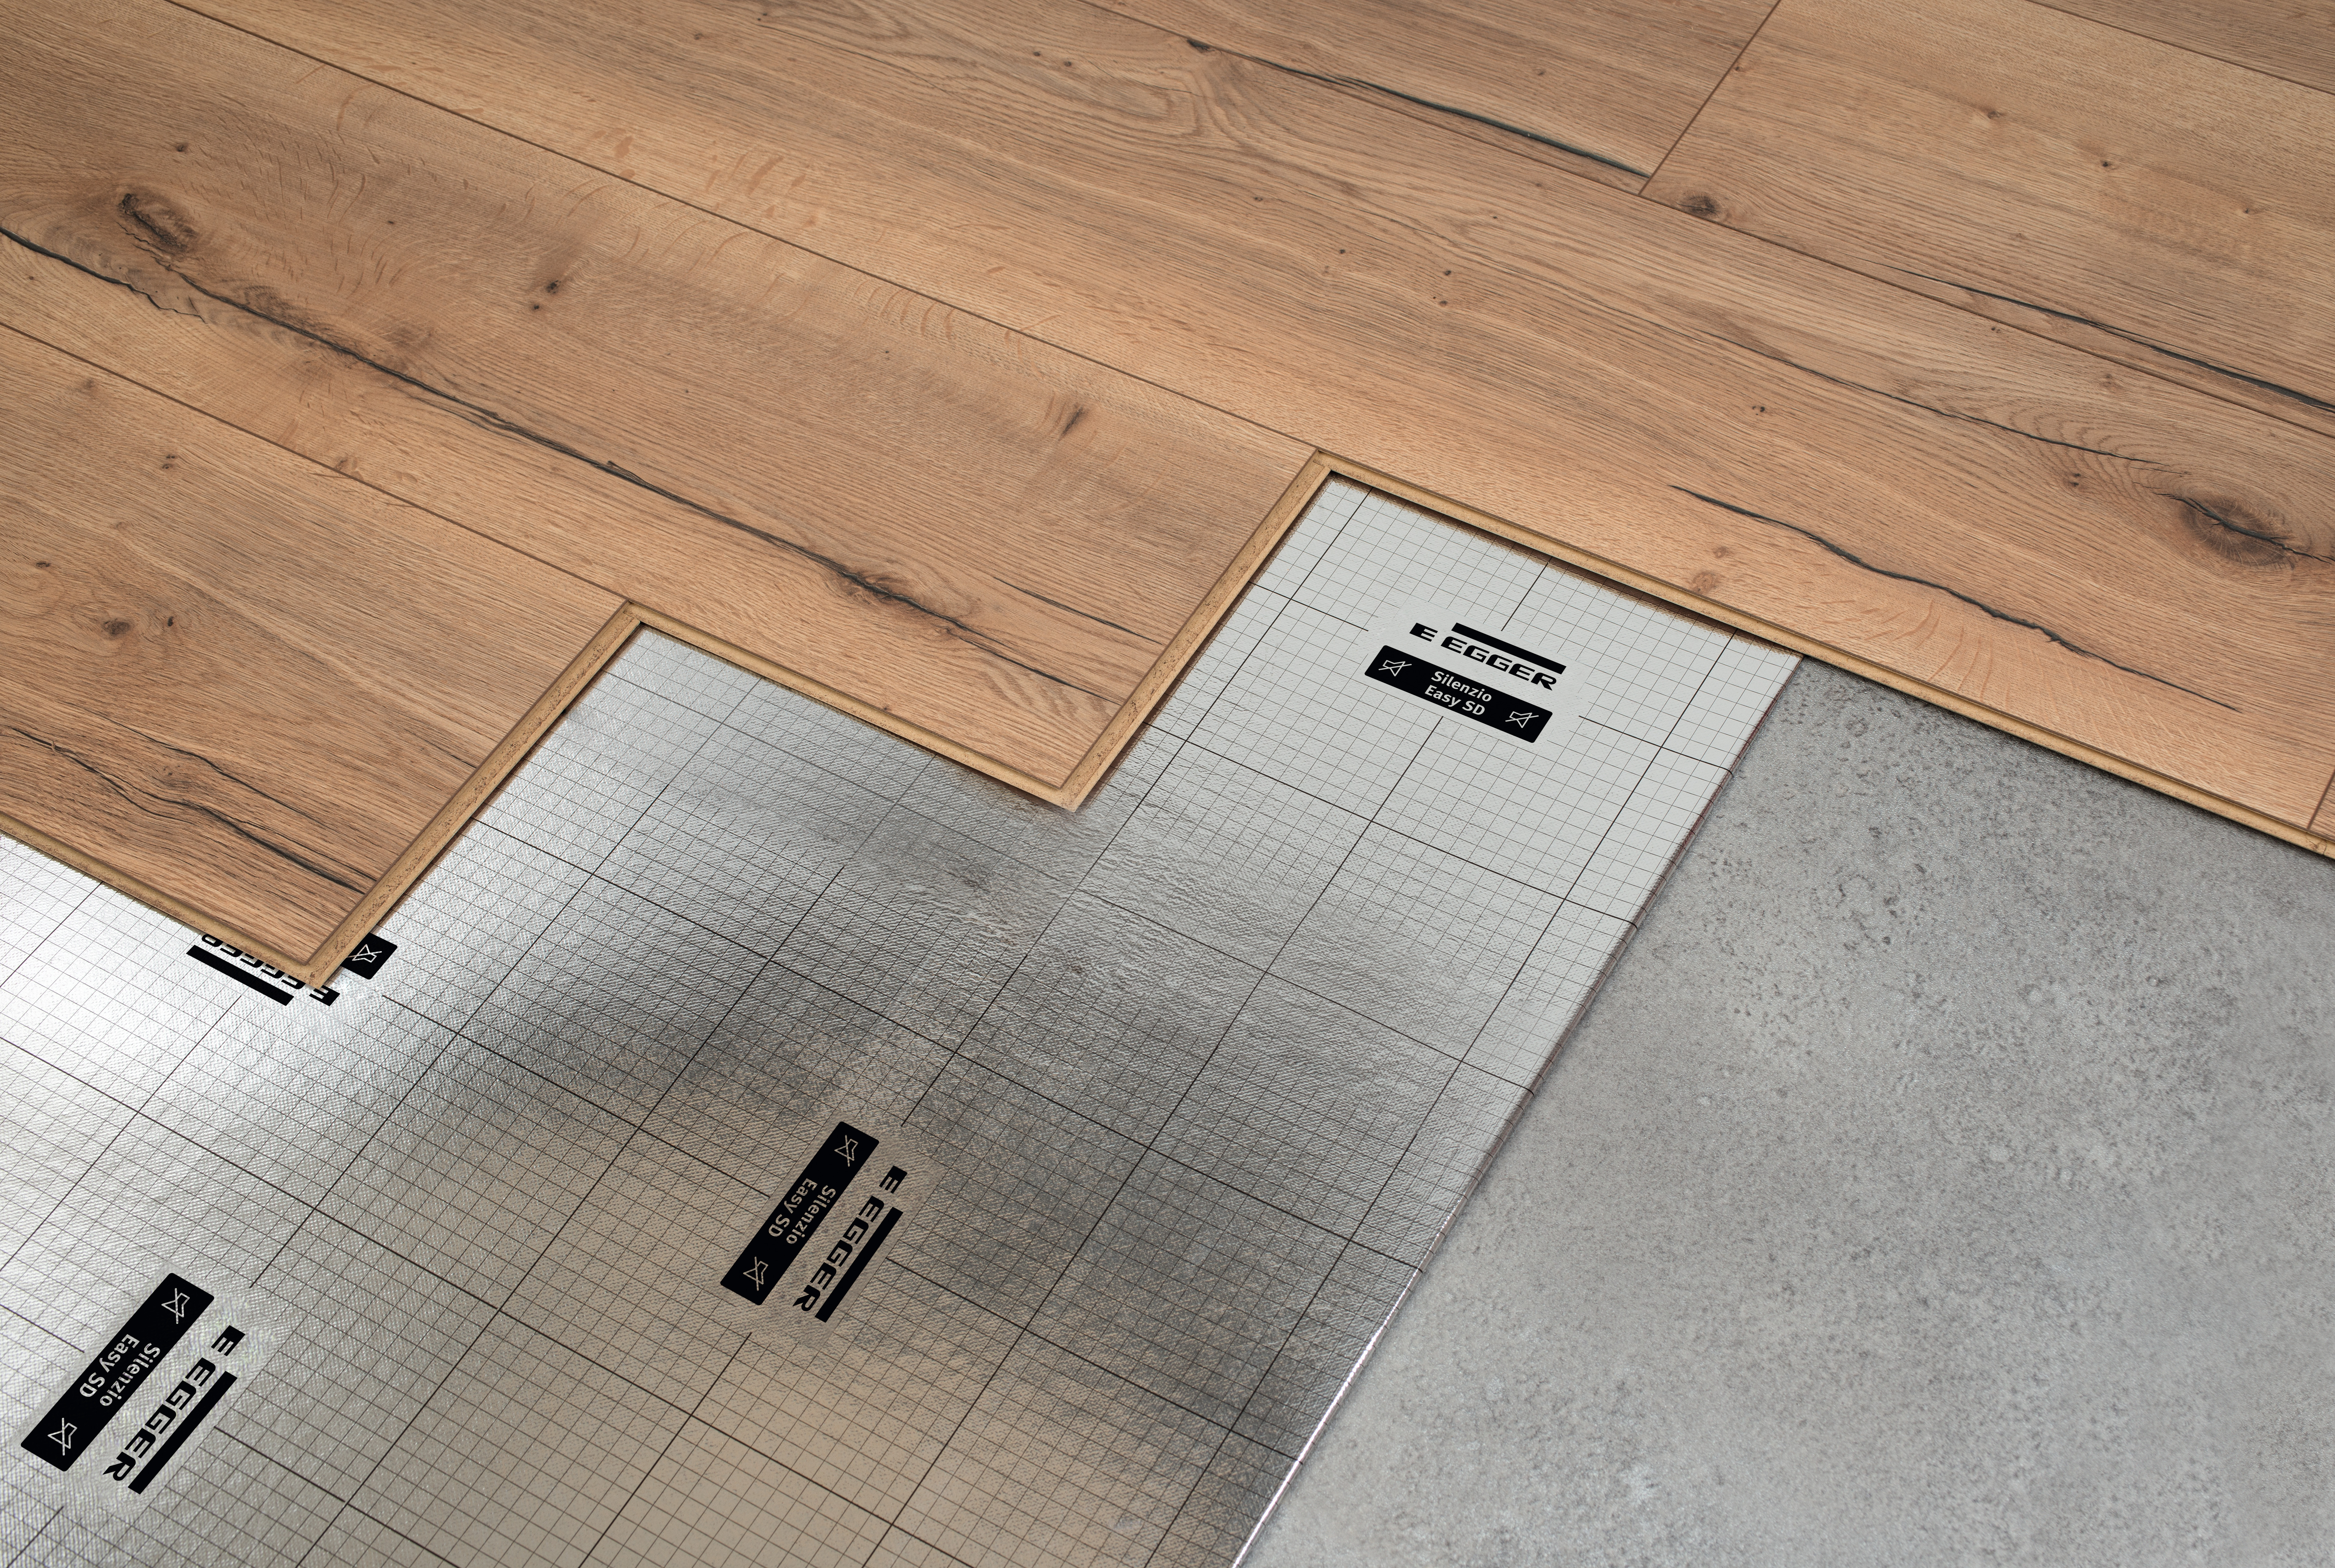 You can find accessories for installing flooring here